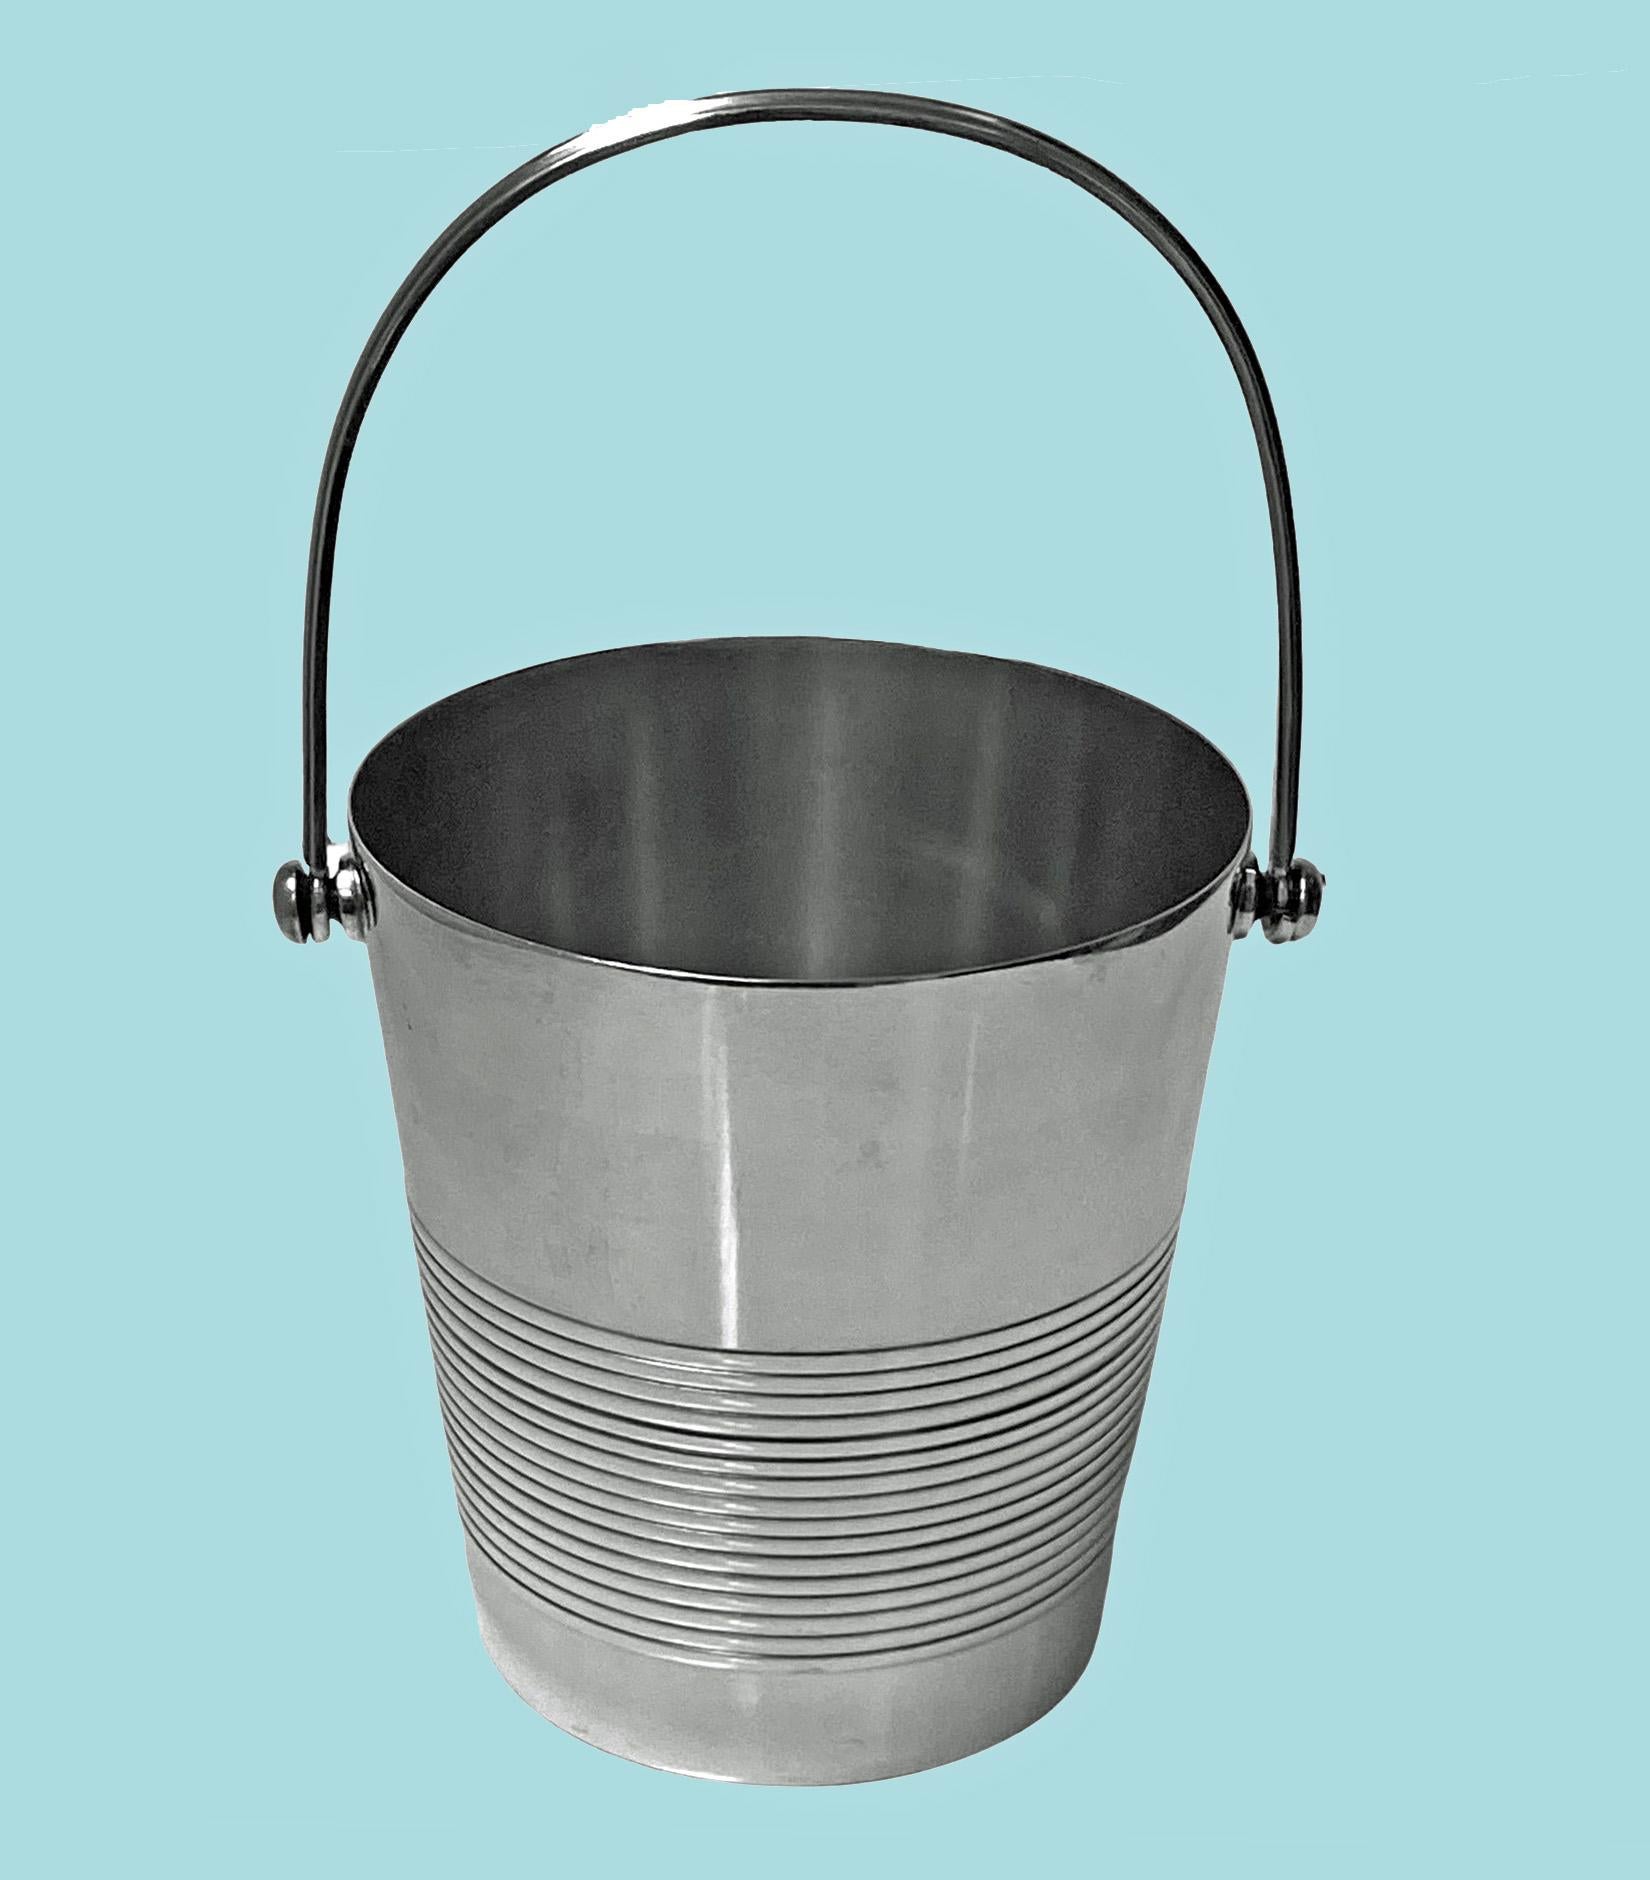 Christofle Art Deco silver plate wine bucket cooler, C.1930 Very slightly tapered form, plain with ribbed band surround, swing reeded handle, conforming in design. Marked with Christofle Marks on base. Height: 5.5 inches (excluding handle). To top